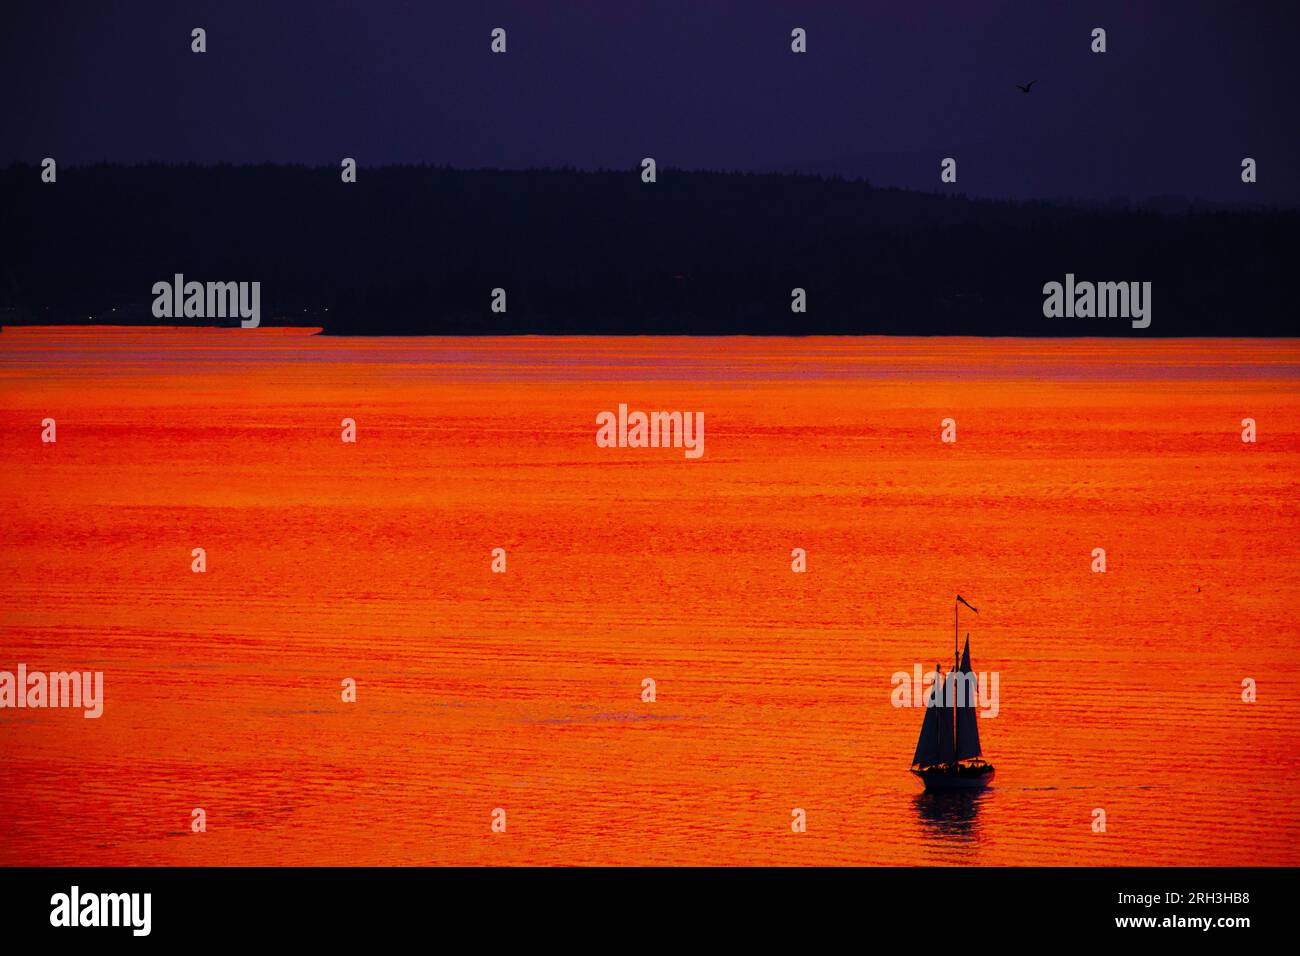 A sailboat is silhouetted in the setting sun's afterglow over the Salish Sea outside Seattle with the Olympic Mountains in the background. Stock Photo